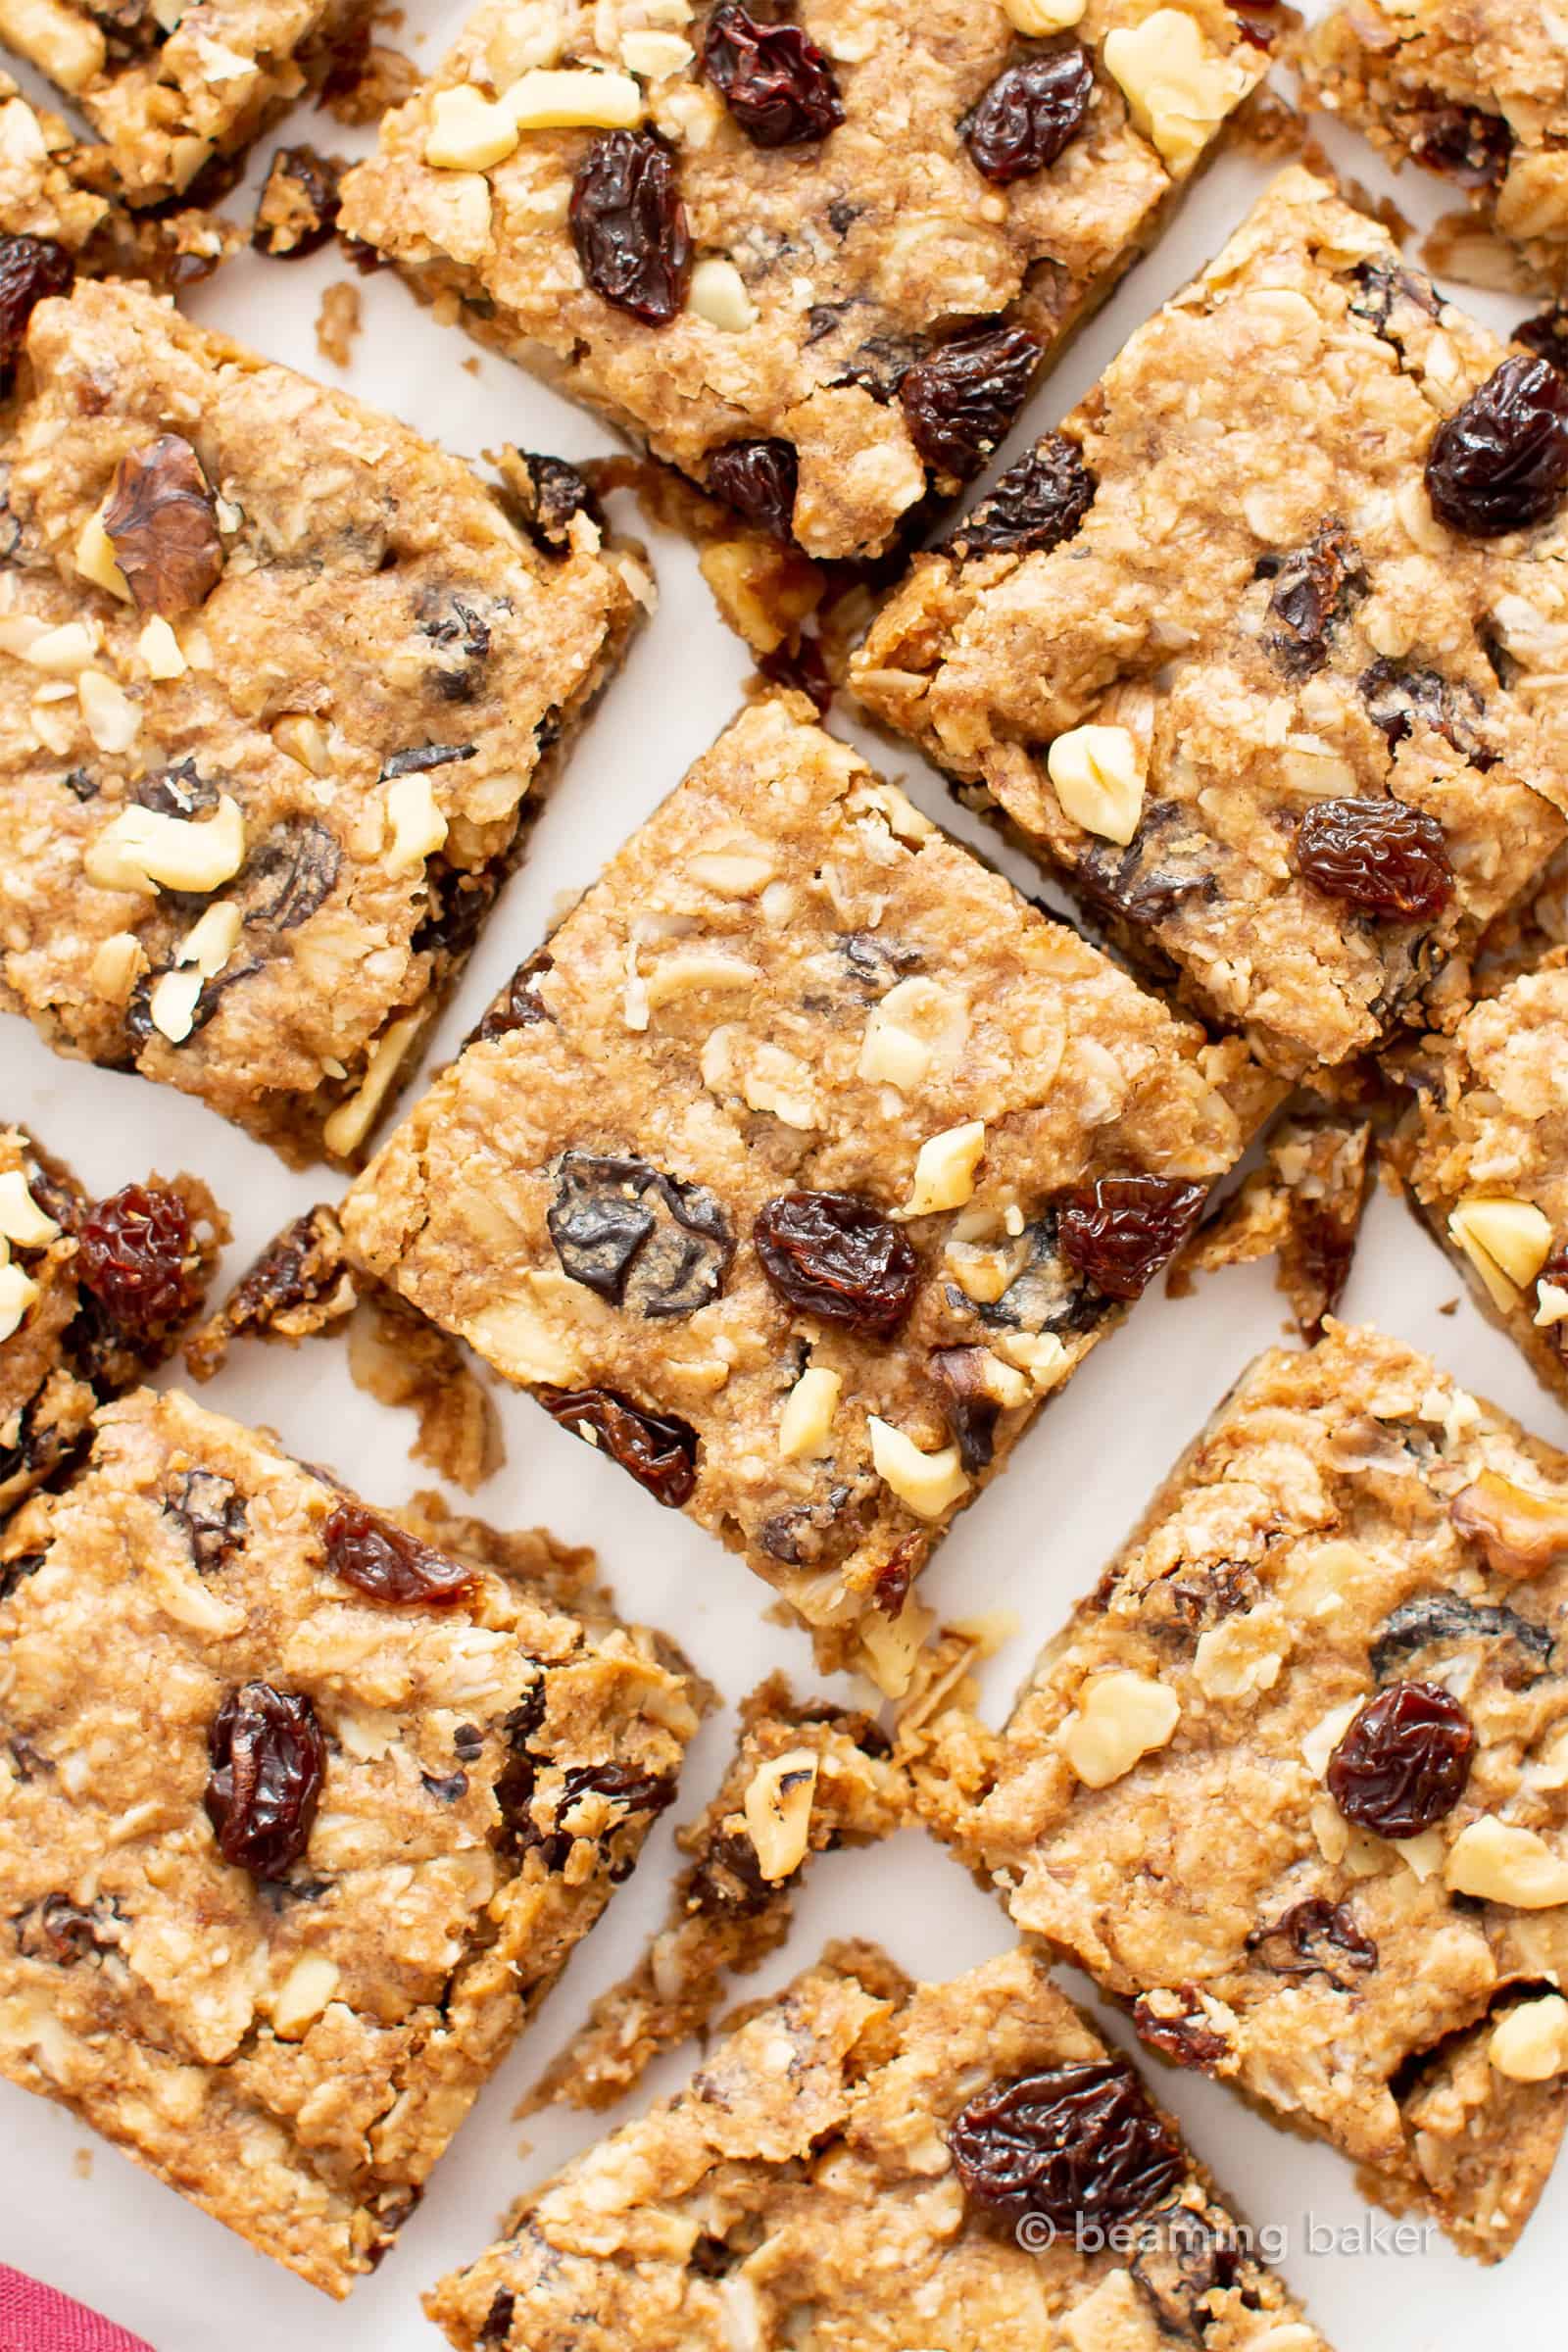 The BEST Vegan Oatmeal Raisin Bars Recipe: chewy centers, crispy edges, packed with raisins & oats! The ultimate gluten free oatmeal cookie bars—healthy, homemade & easy! #Oatmeal #Vegan #GlutenFree #Cookies | Recipe at BeamingBaker.com